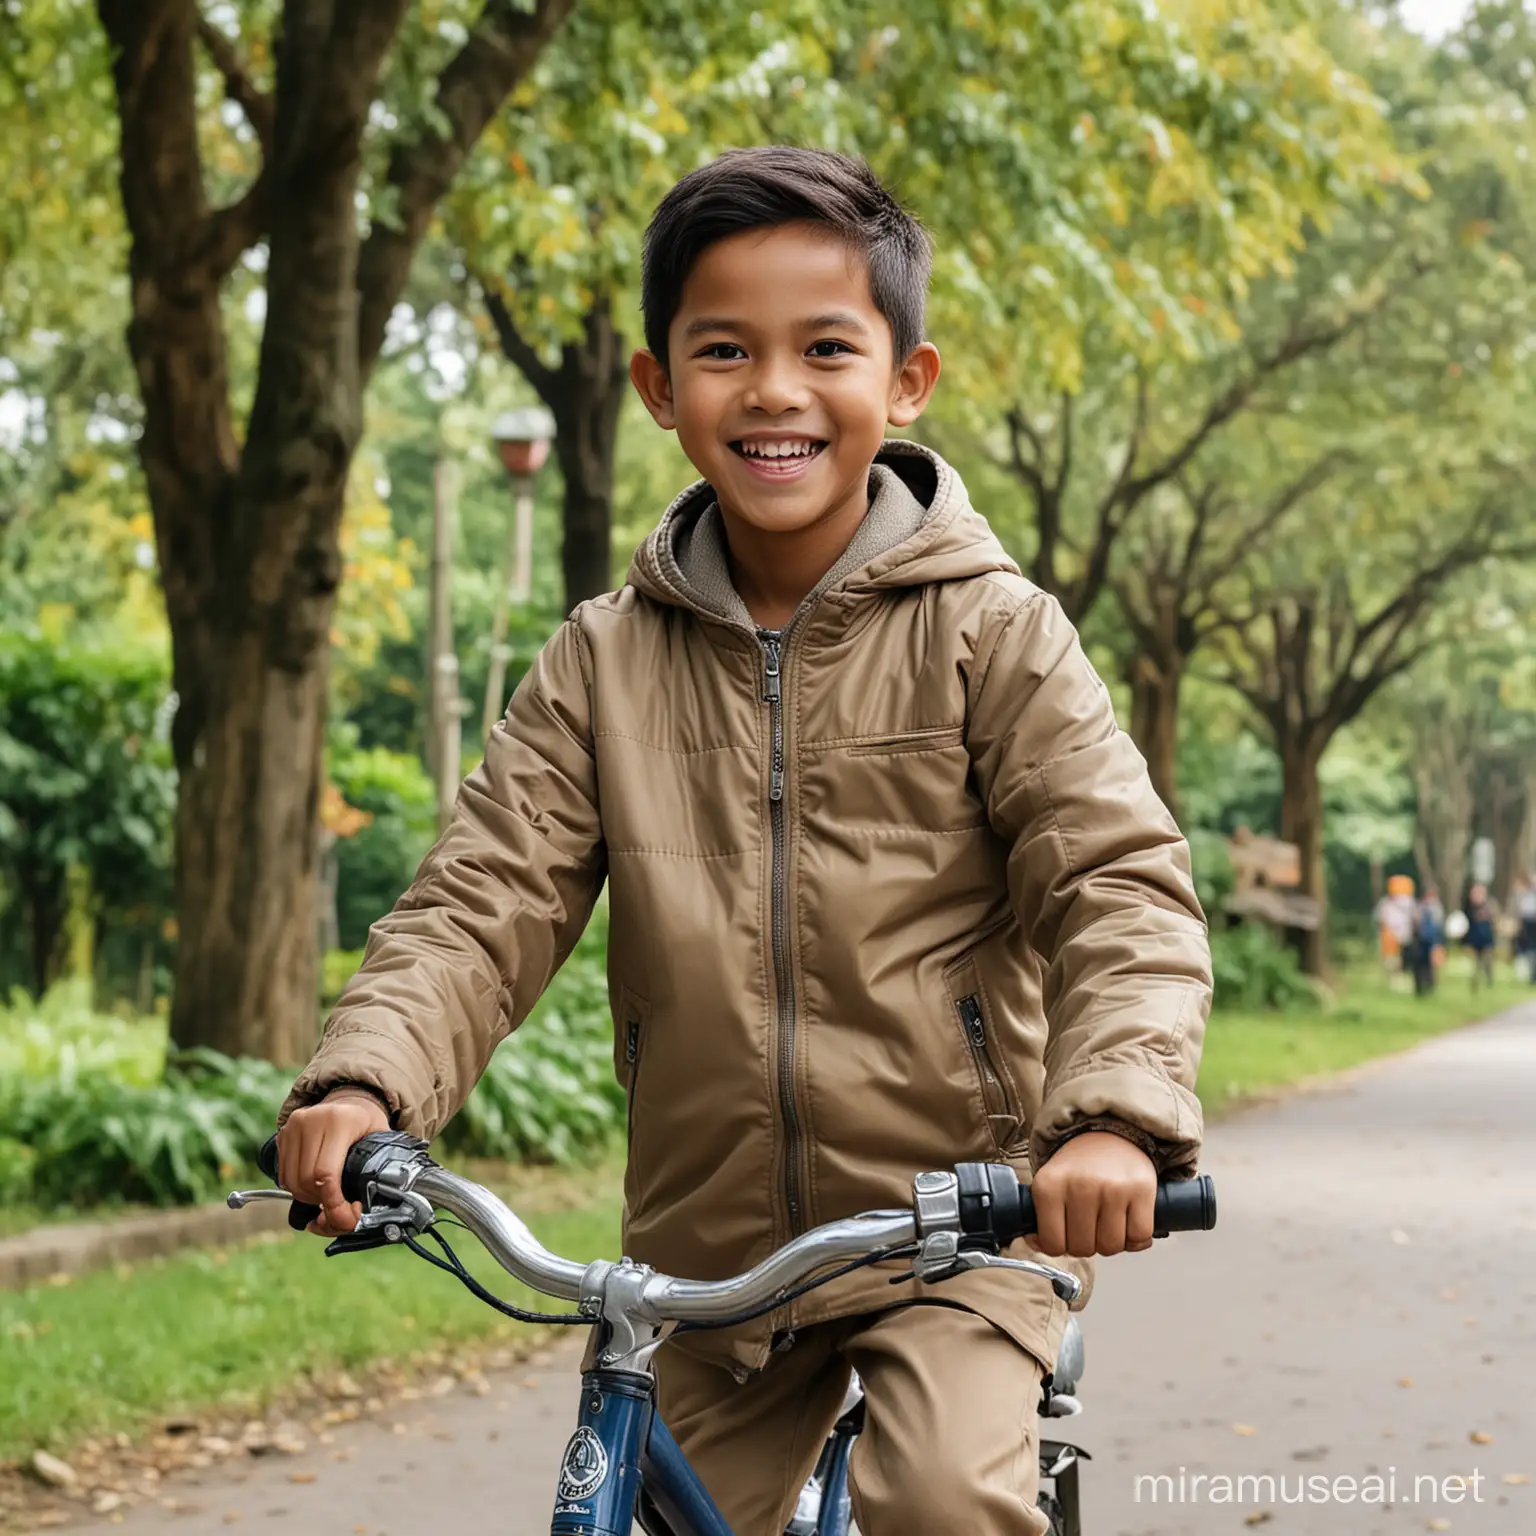 Joyful Indonesian Boy Cycling with Younger Brother in Park